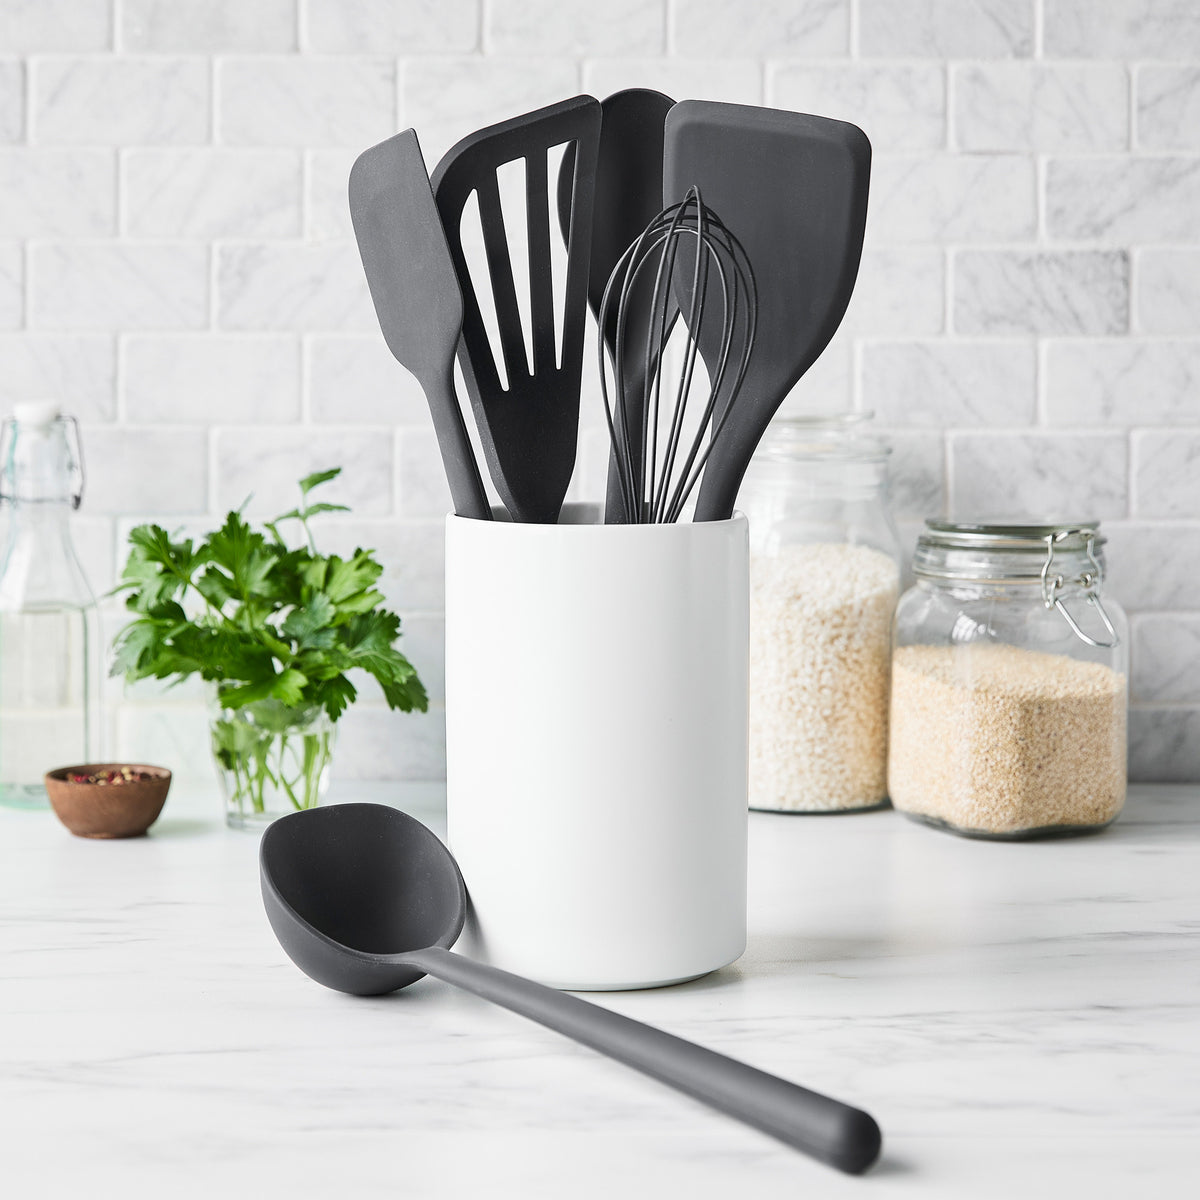 Cook's Tools: 30–50% Off